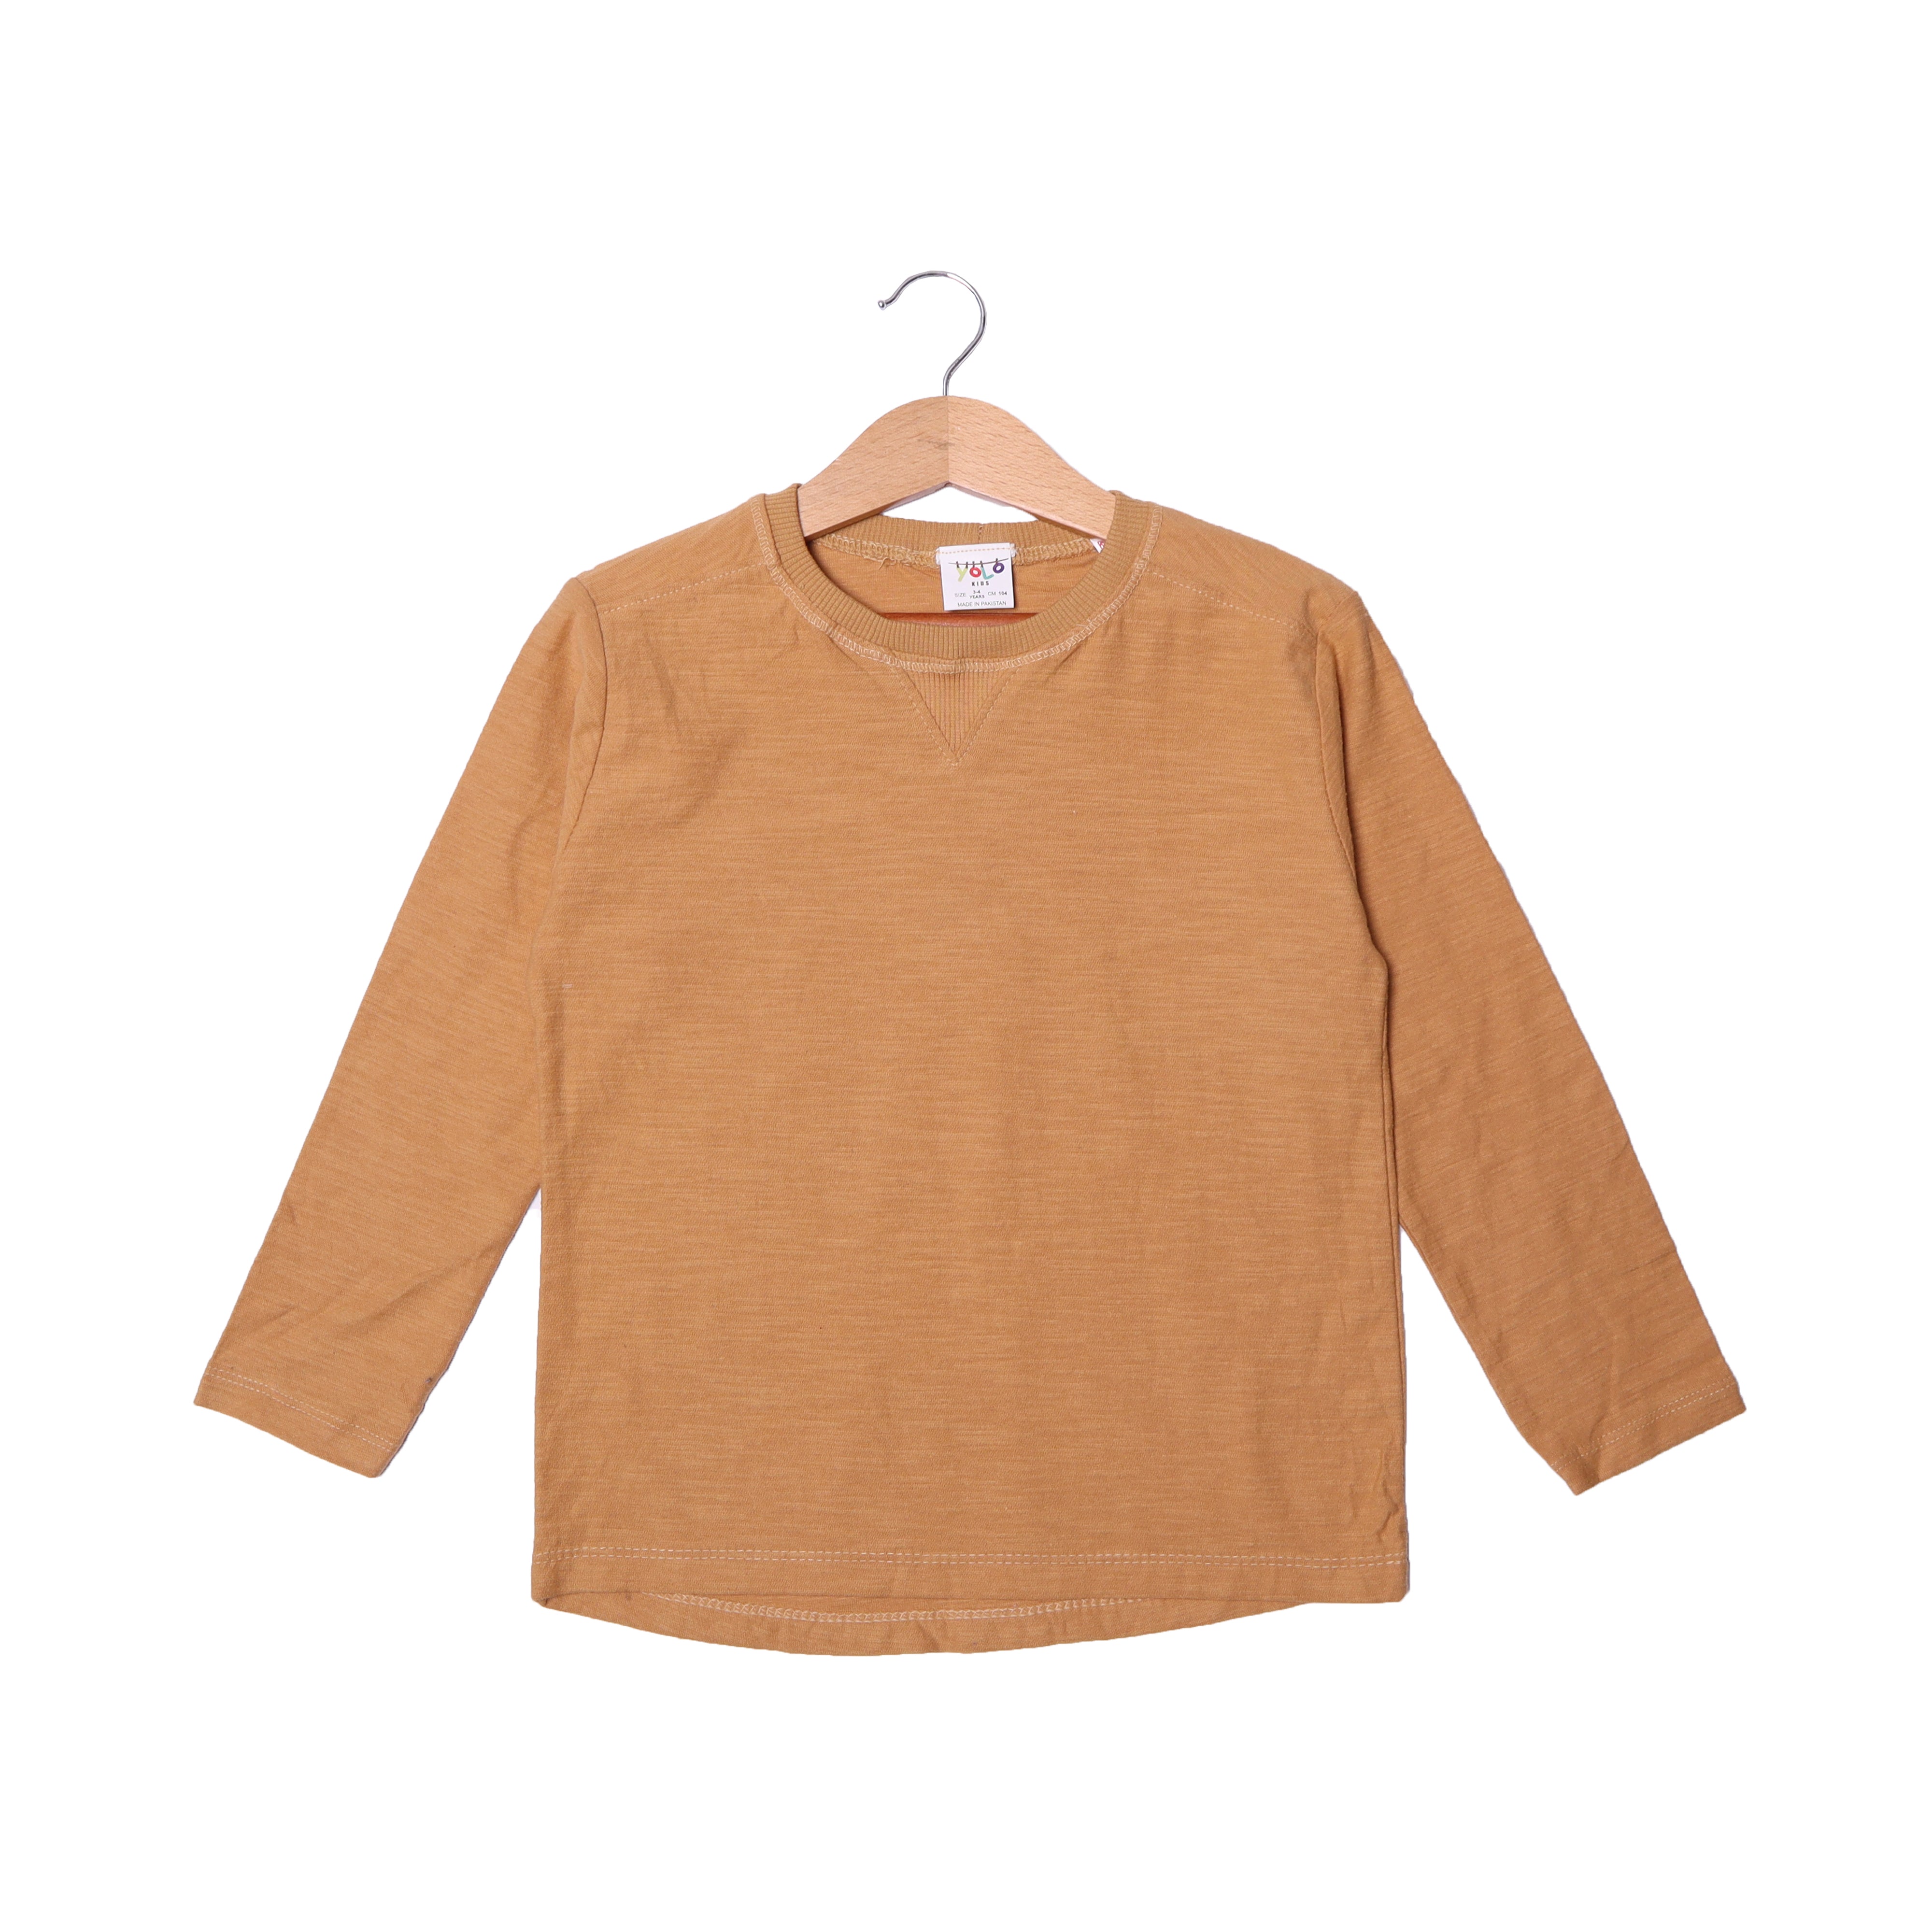 BROWN PLAIN RIBBED ROUND NECK FULL SLEEVES T-SHIRT